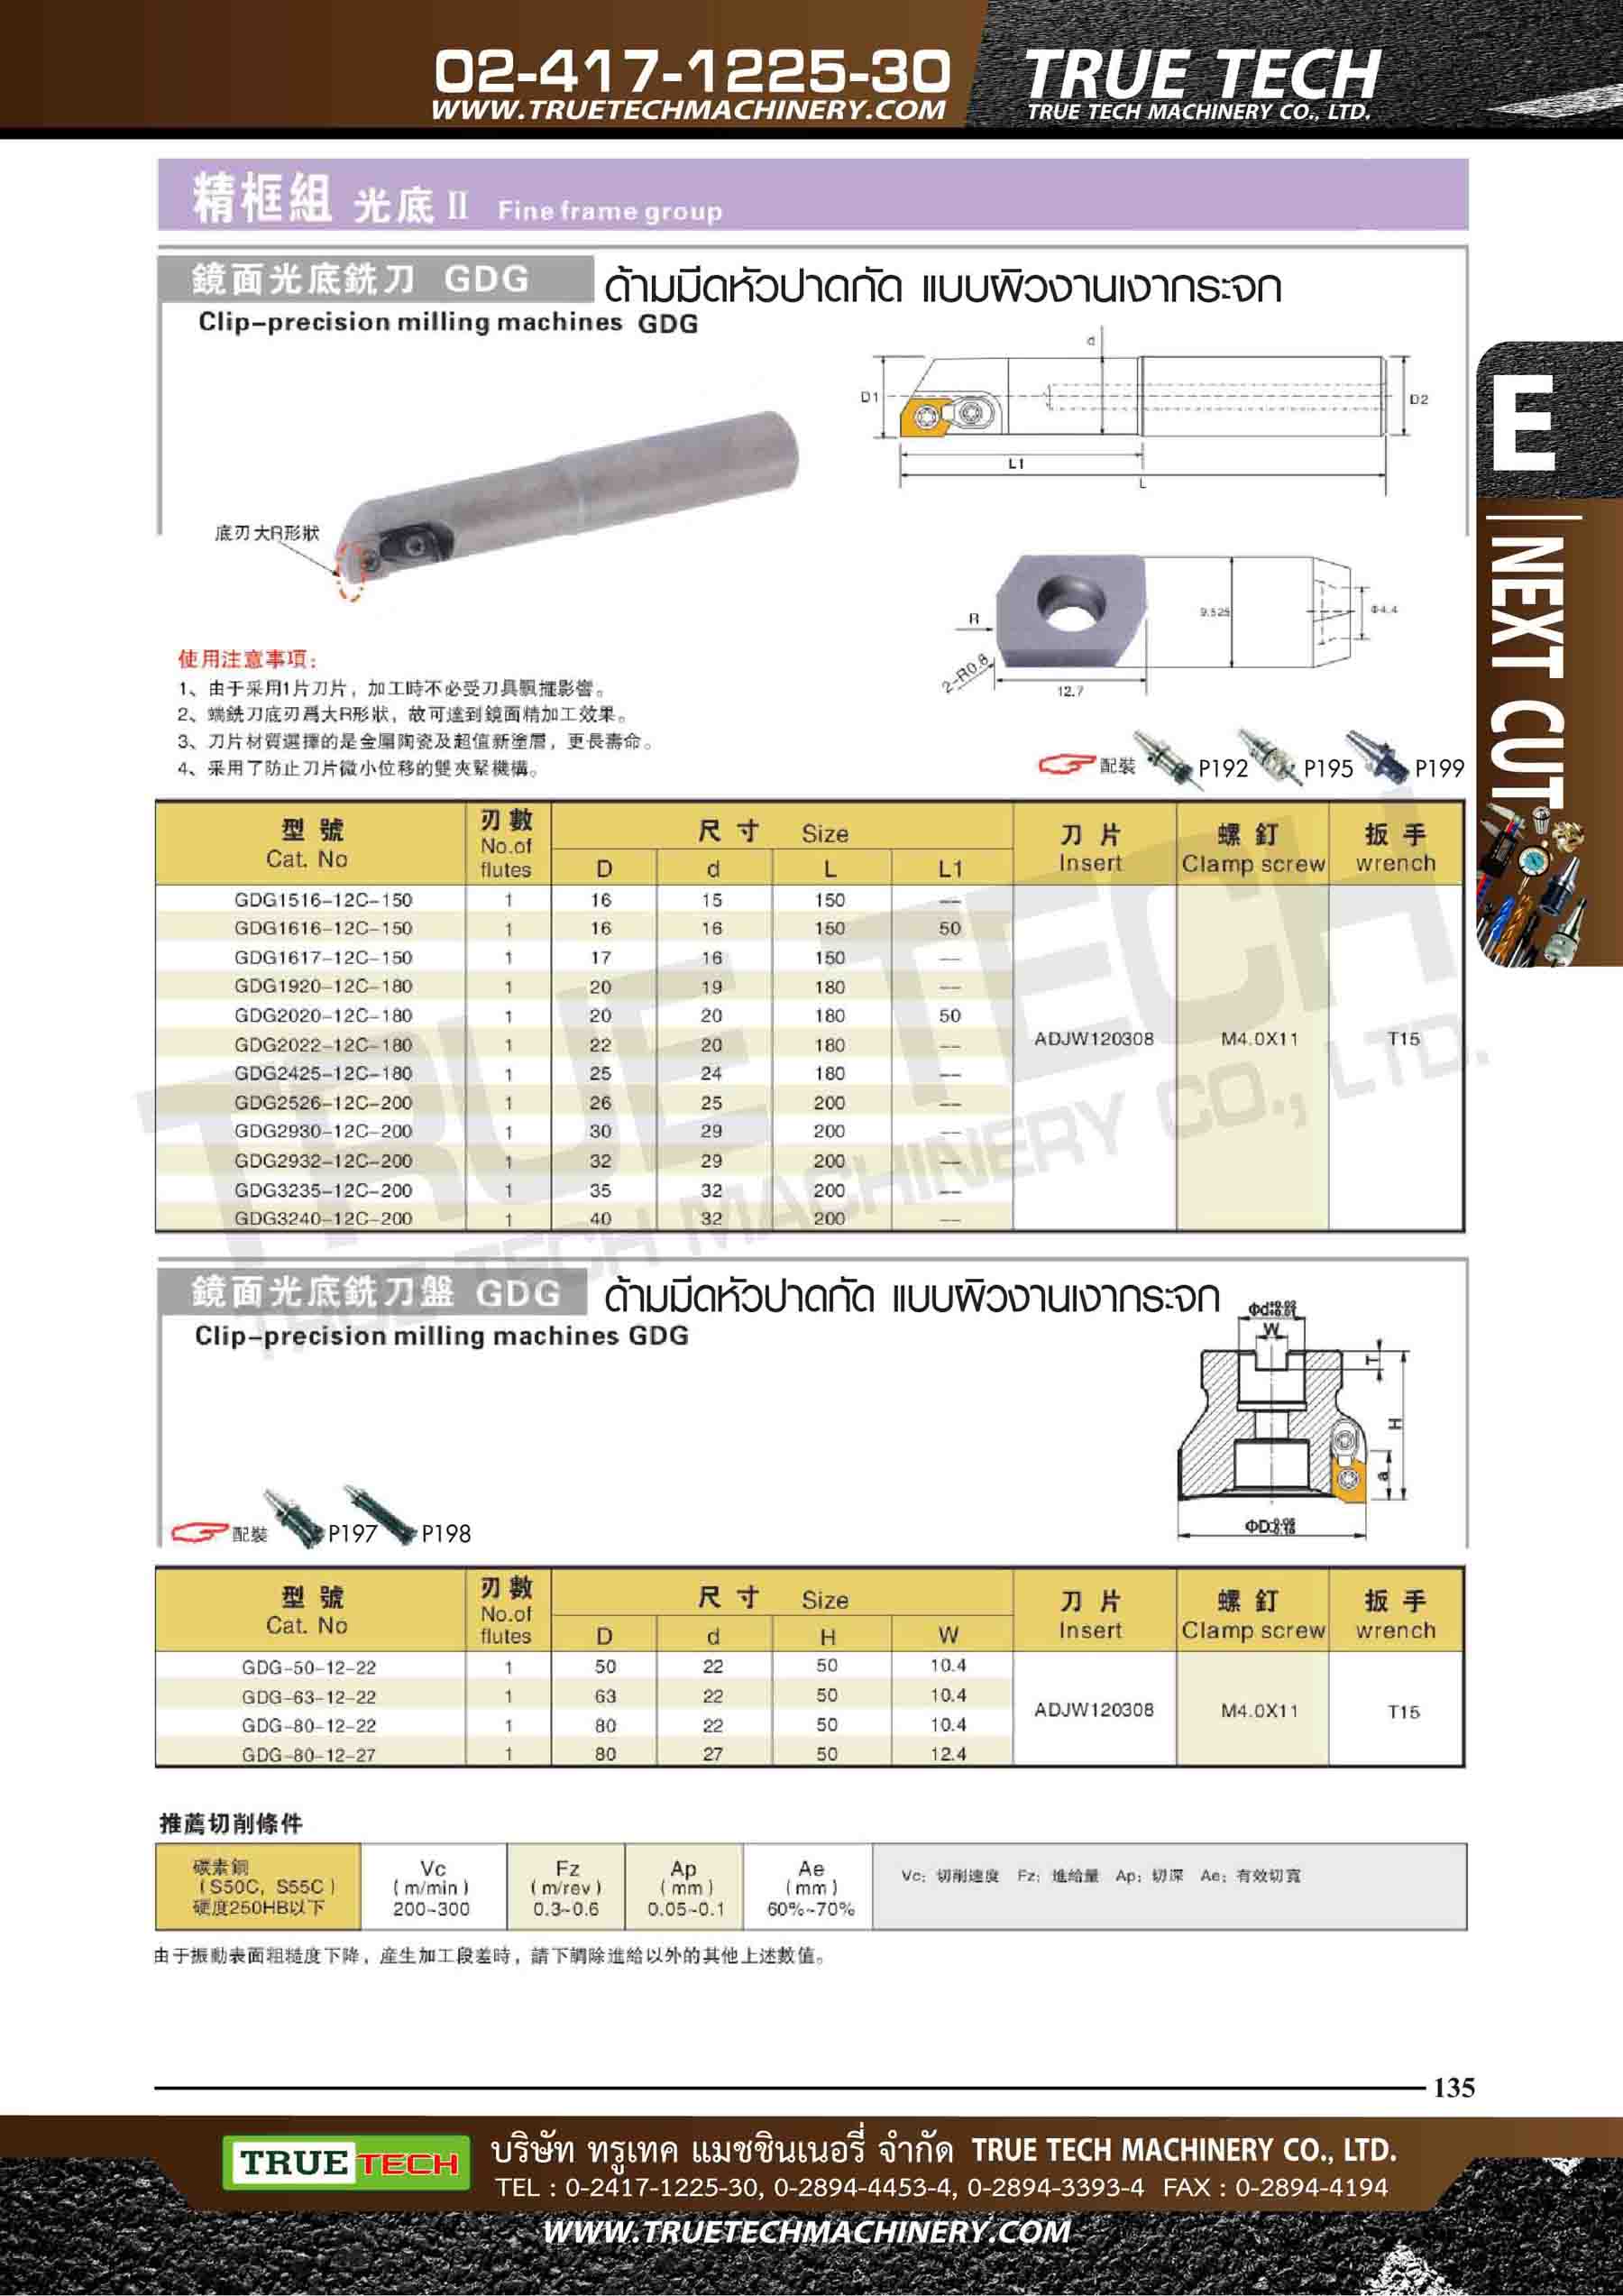 TRUE TECH MACHINERY CO.,LTD. sales of machinery. Equipment. Hand tools,  industrial equipment, Cutting Tools, Mold Components, Precision Machine tel  66-2892-0044